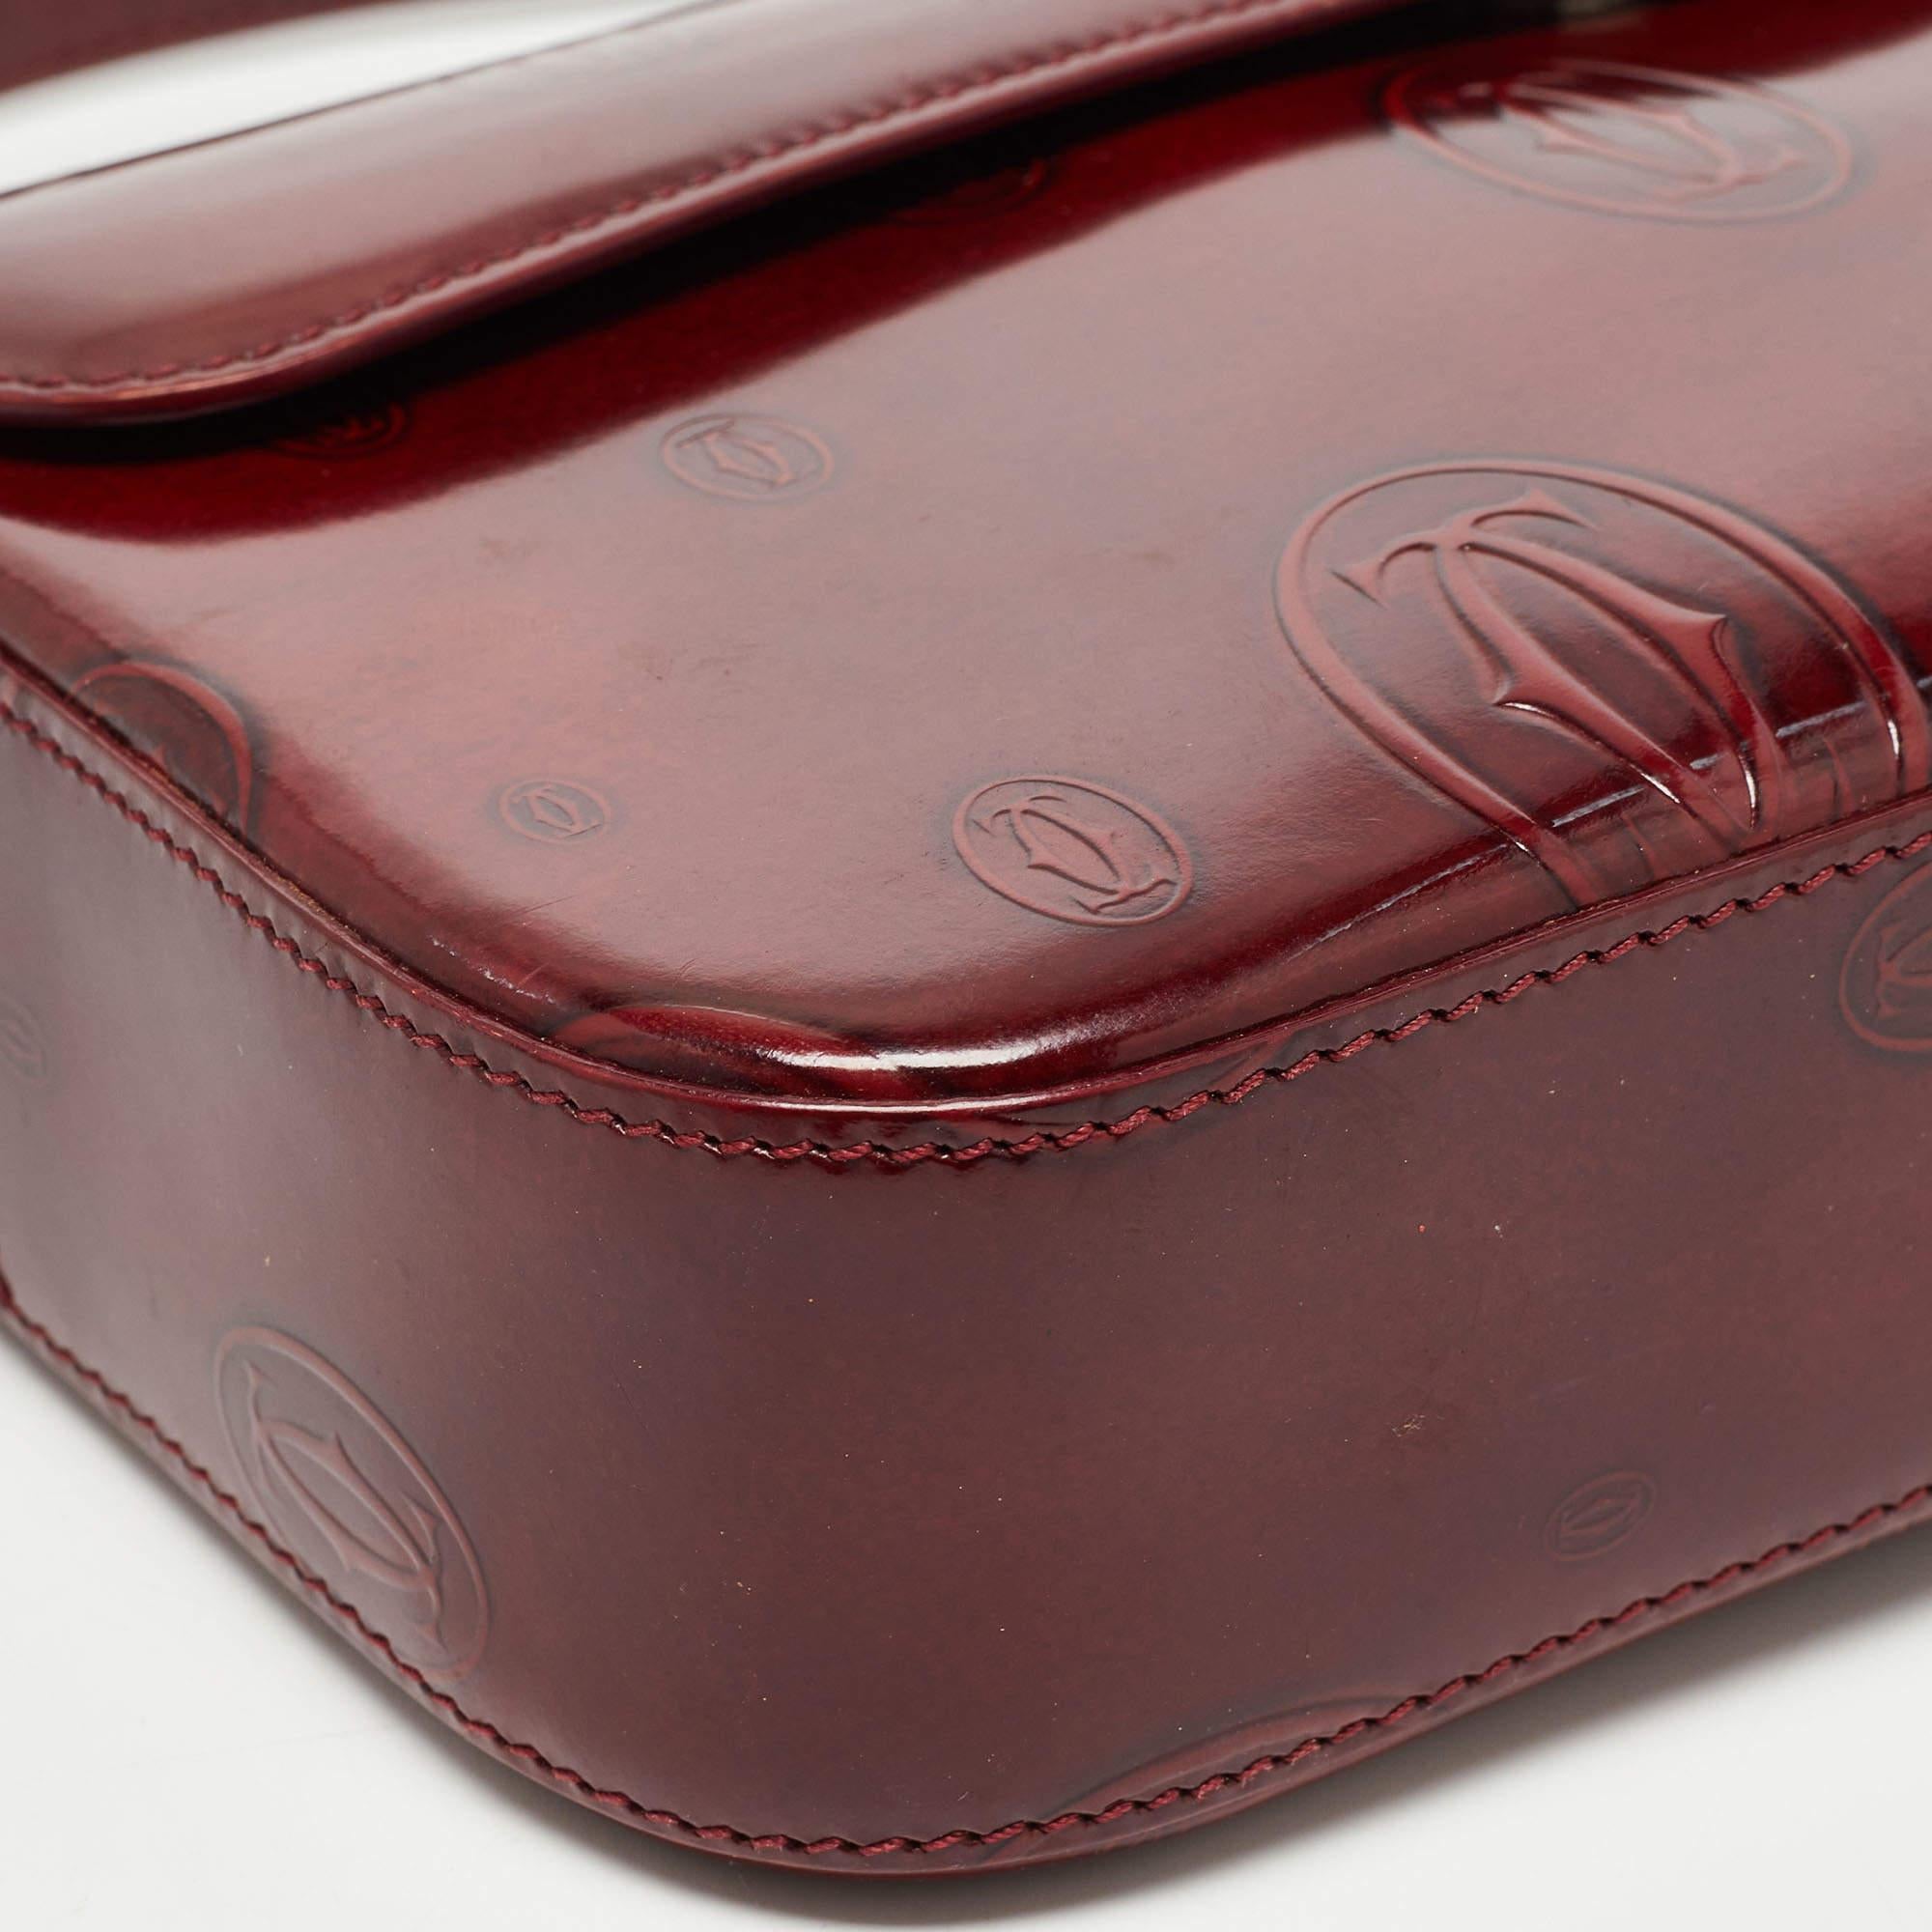 Cartier Burgundy Patent Leather Happy Birthday Baguette Bag 4